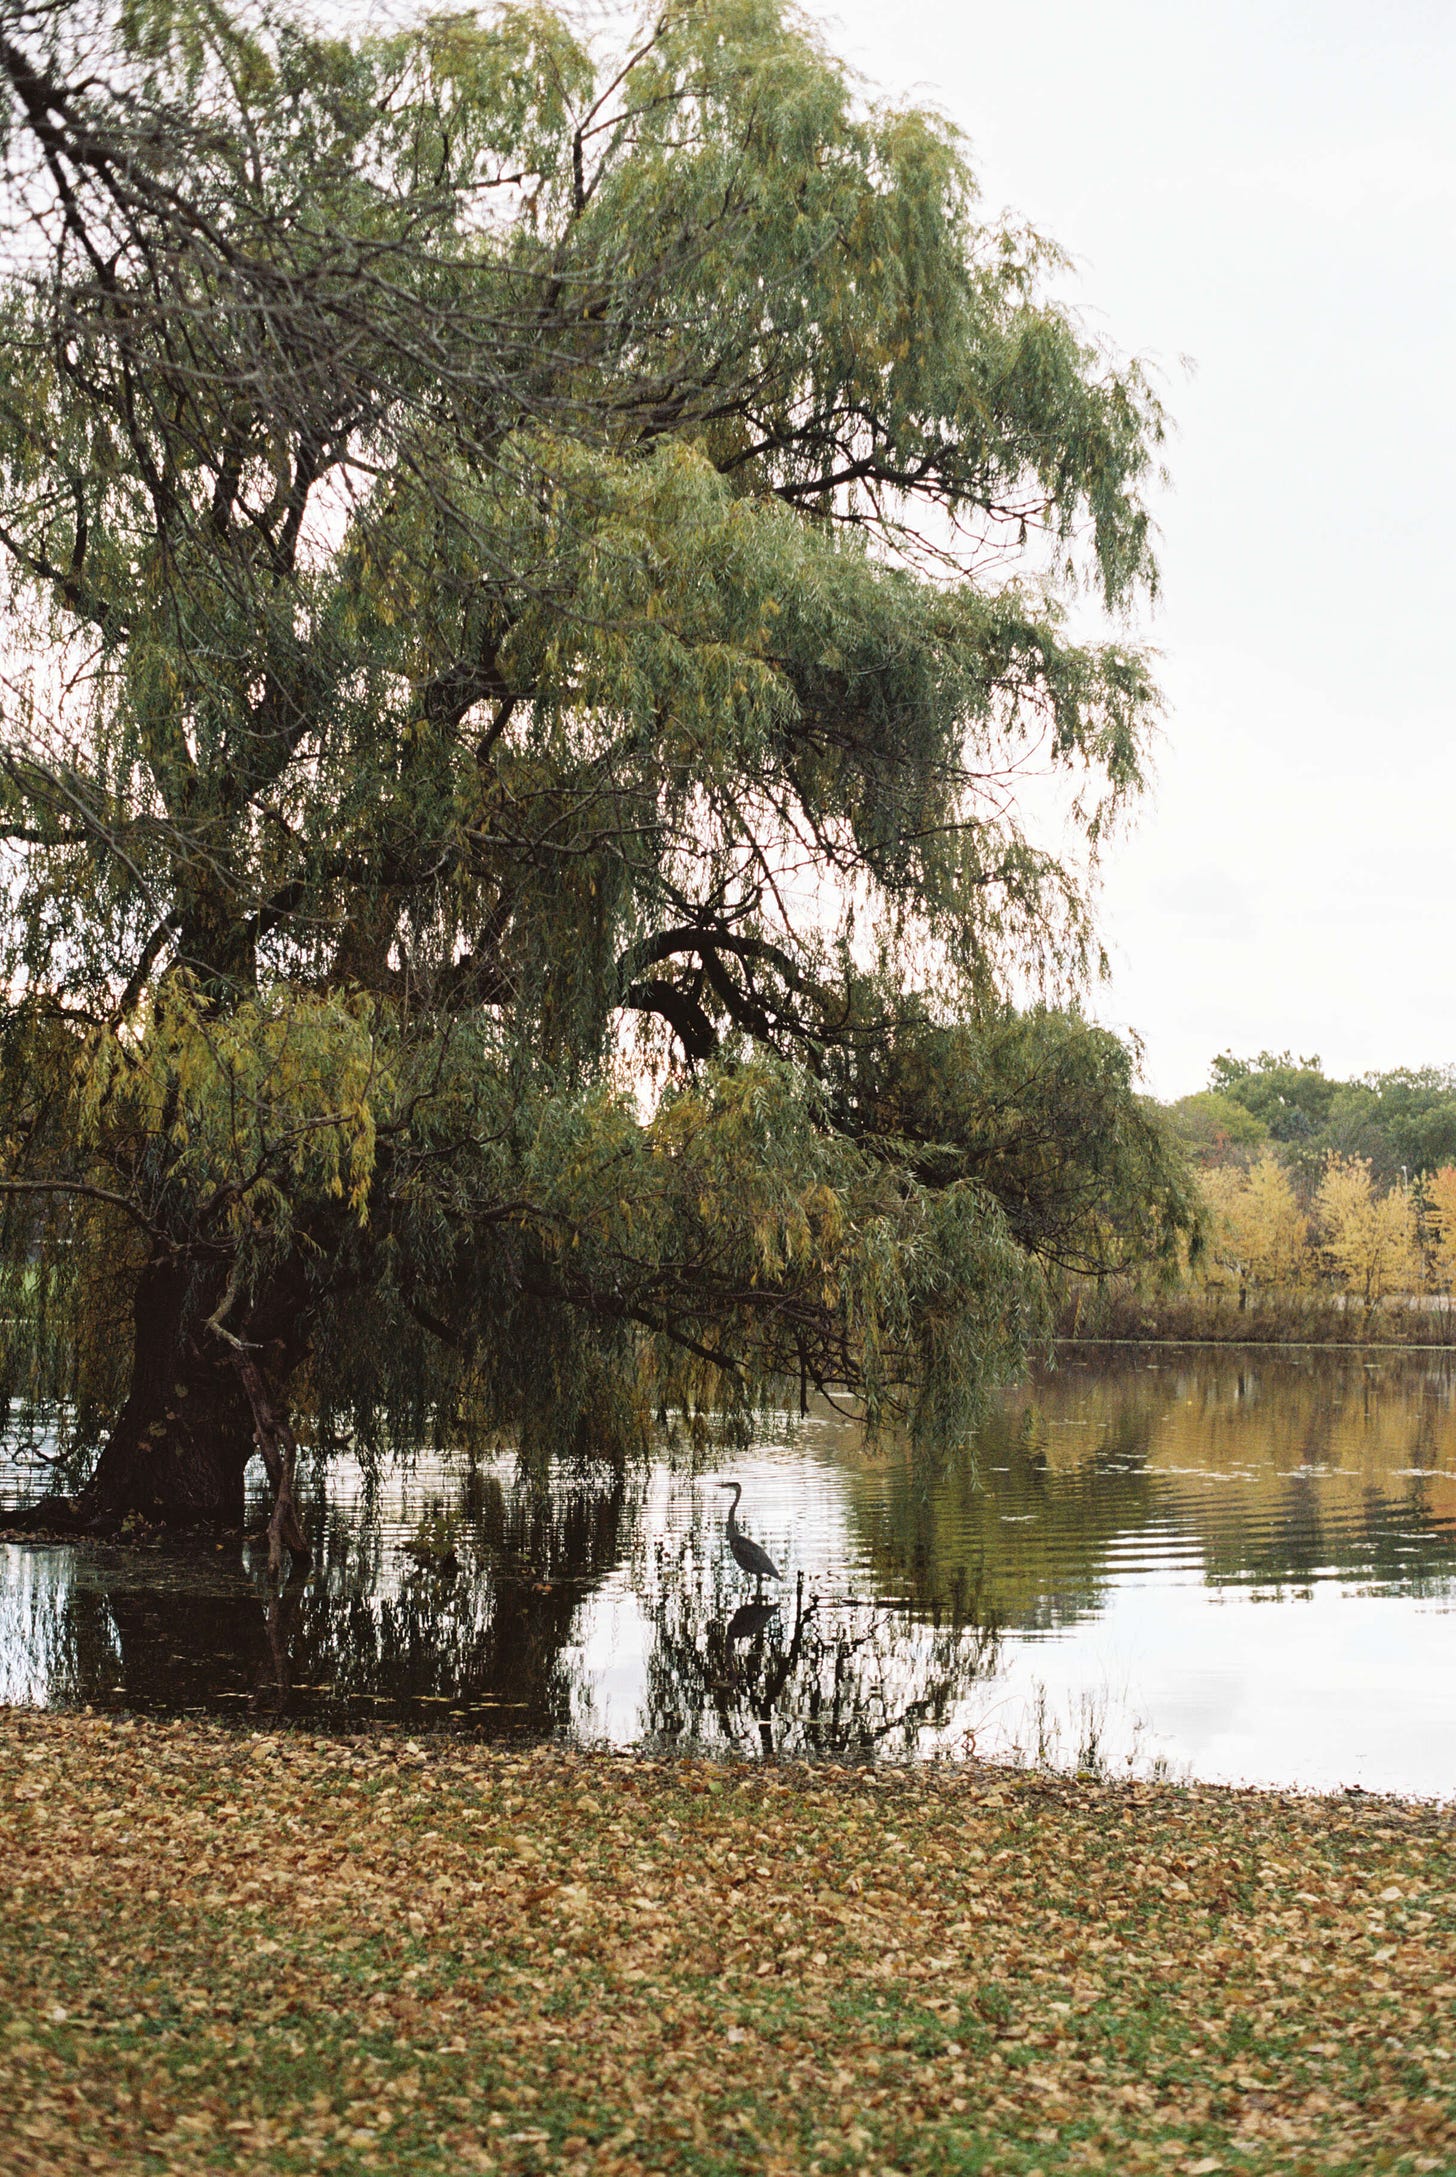 A heron stands in the shallows of a small lake beneath a white sky and a large green tree.